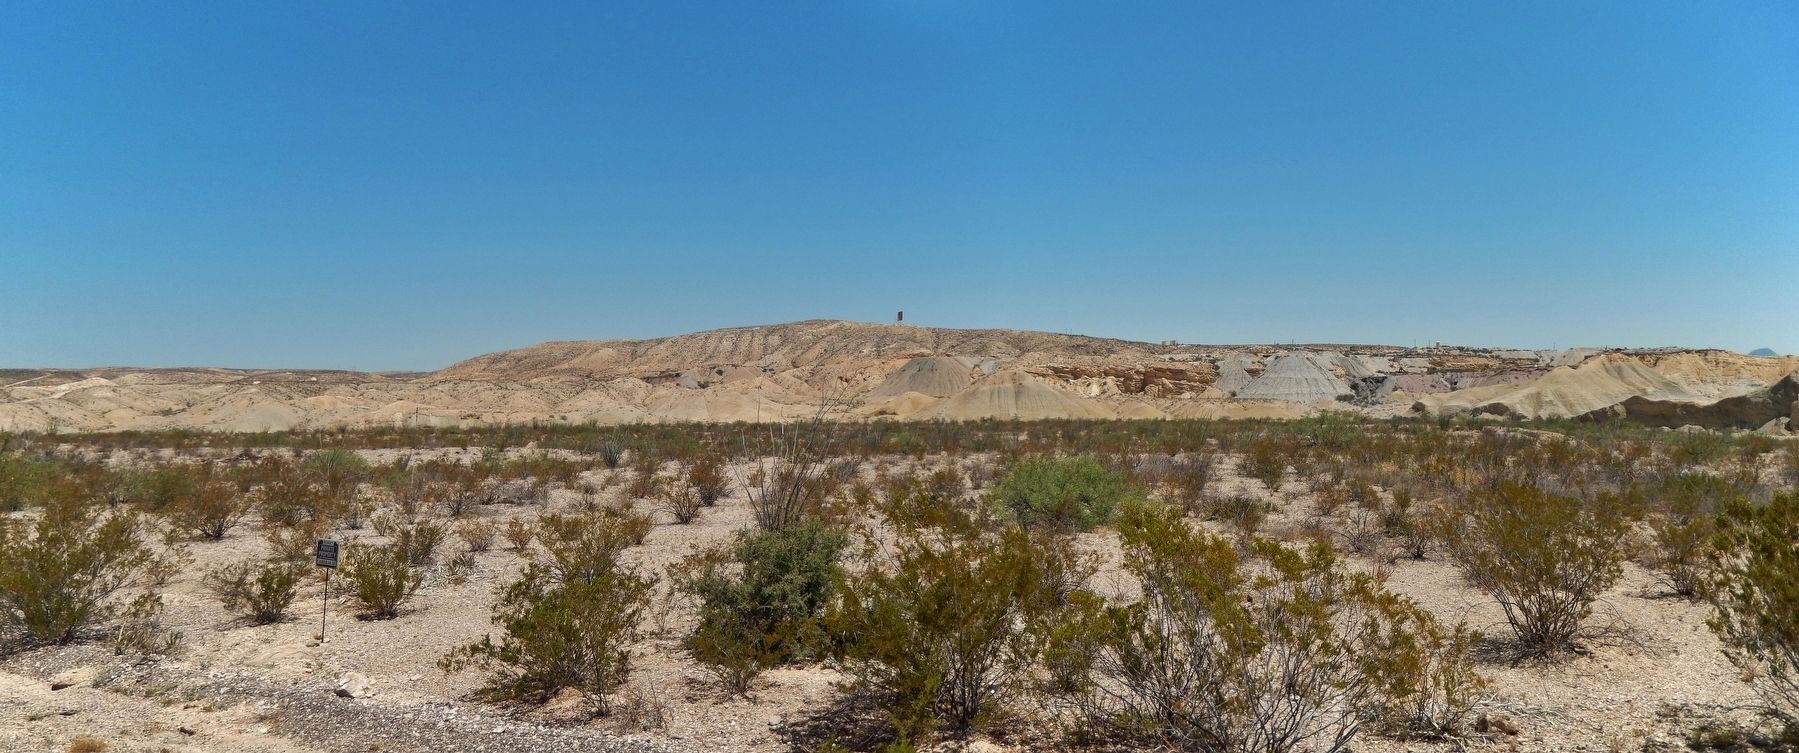 Terlingua Landscape (<i>view from marker</i>) image. Click for full size.